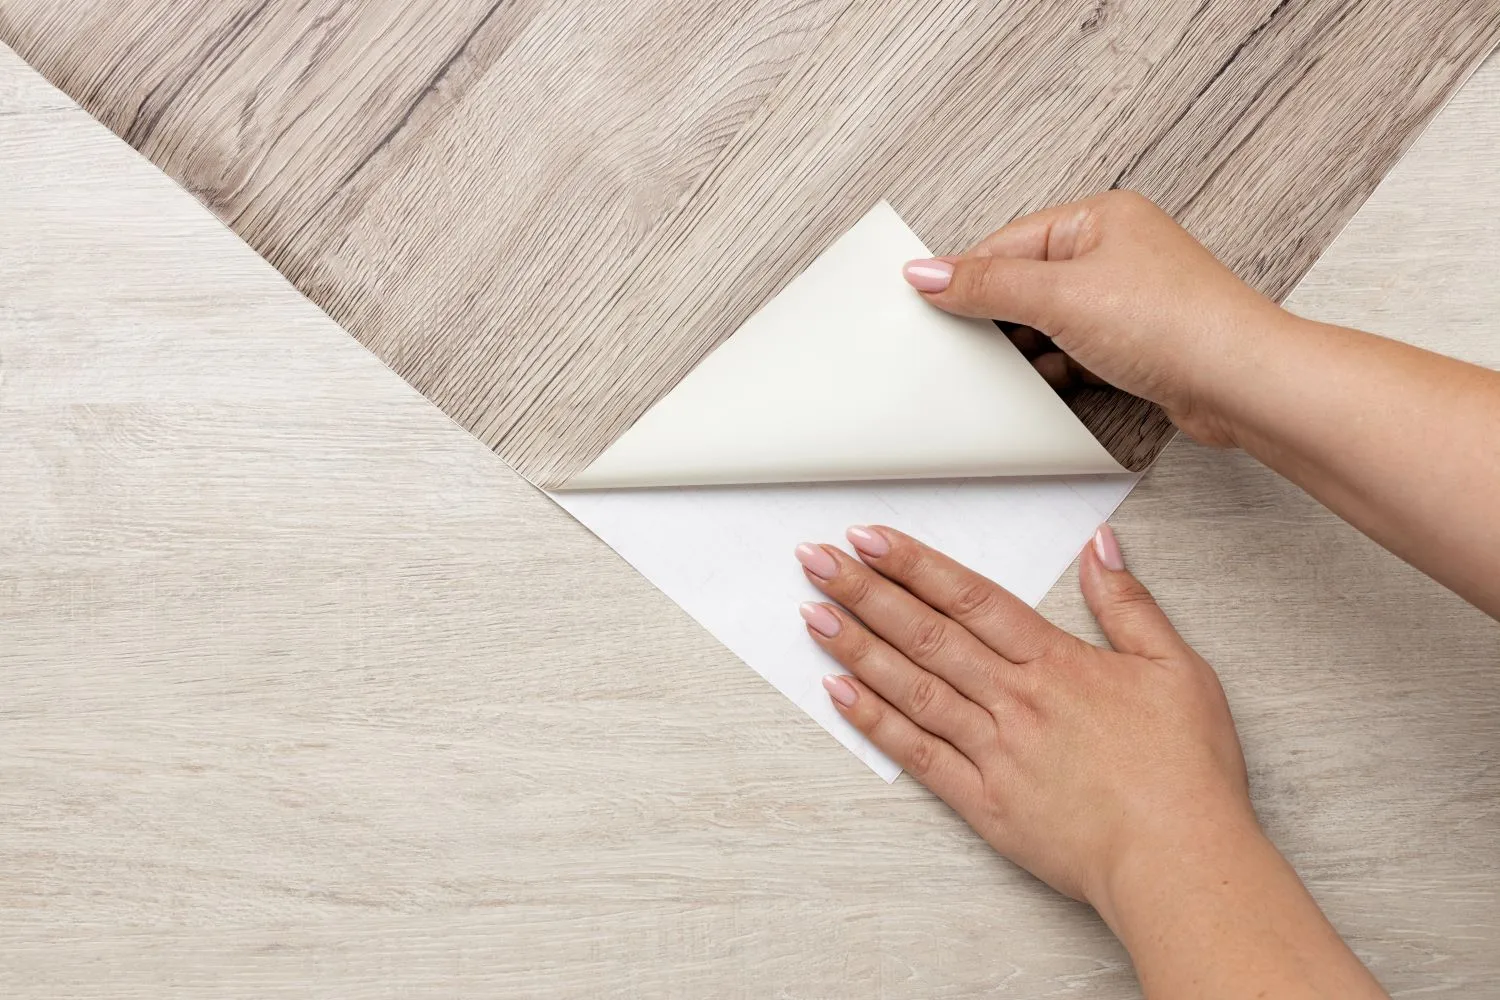 Contact paper comes in a range of colors and patterns to fit any style preference.